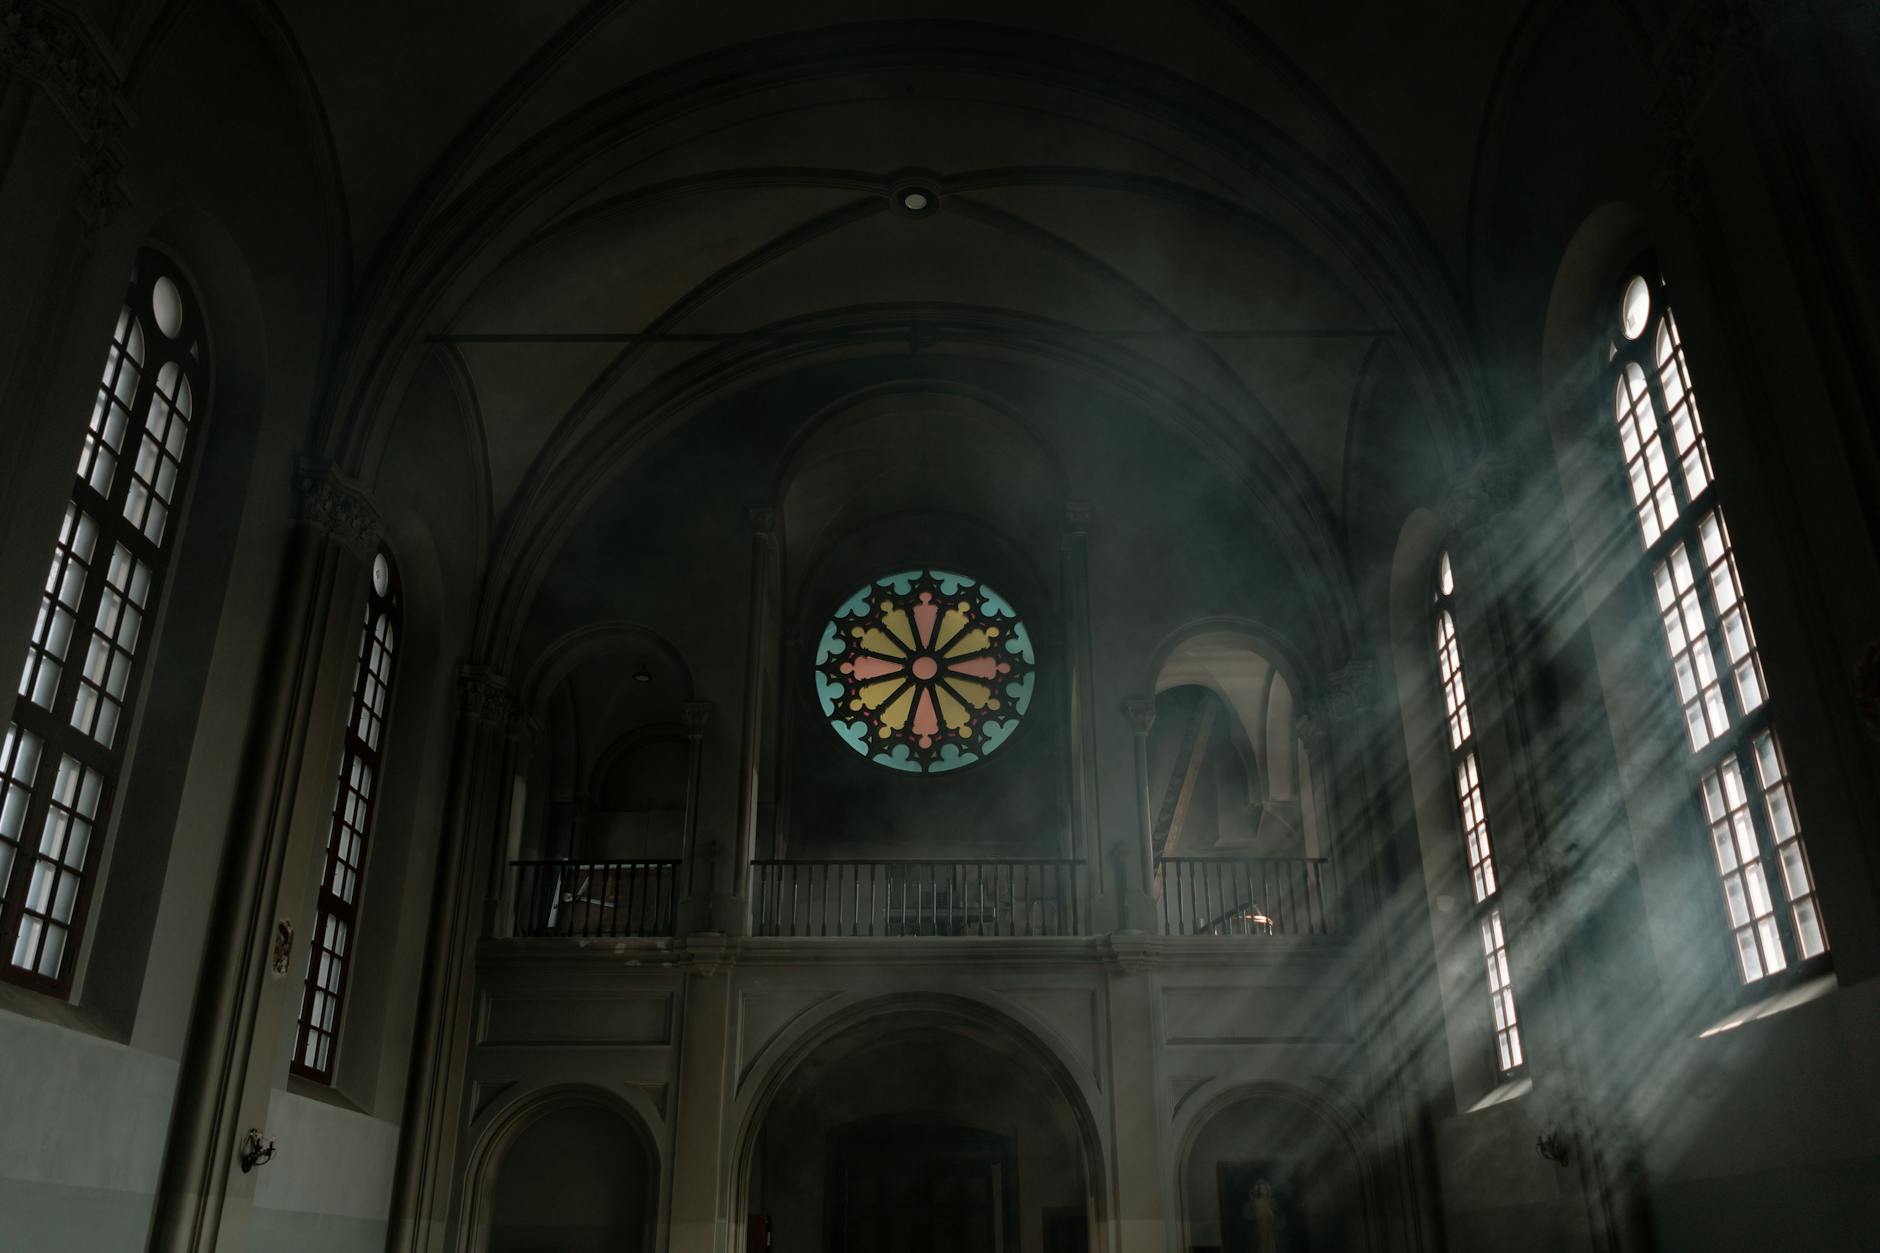 dark cathedral interior and light from the windows